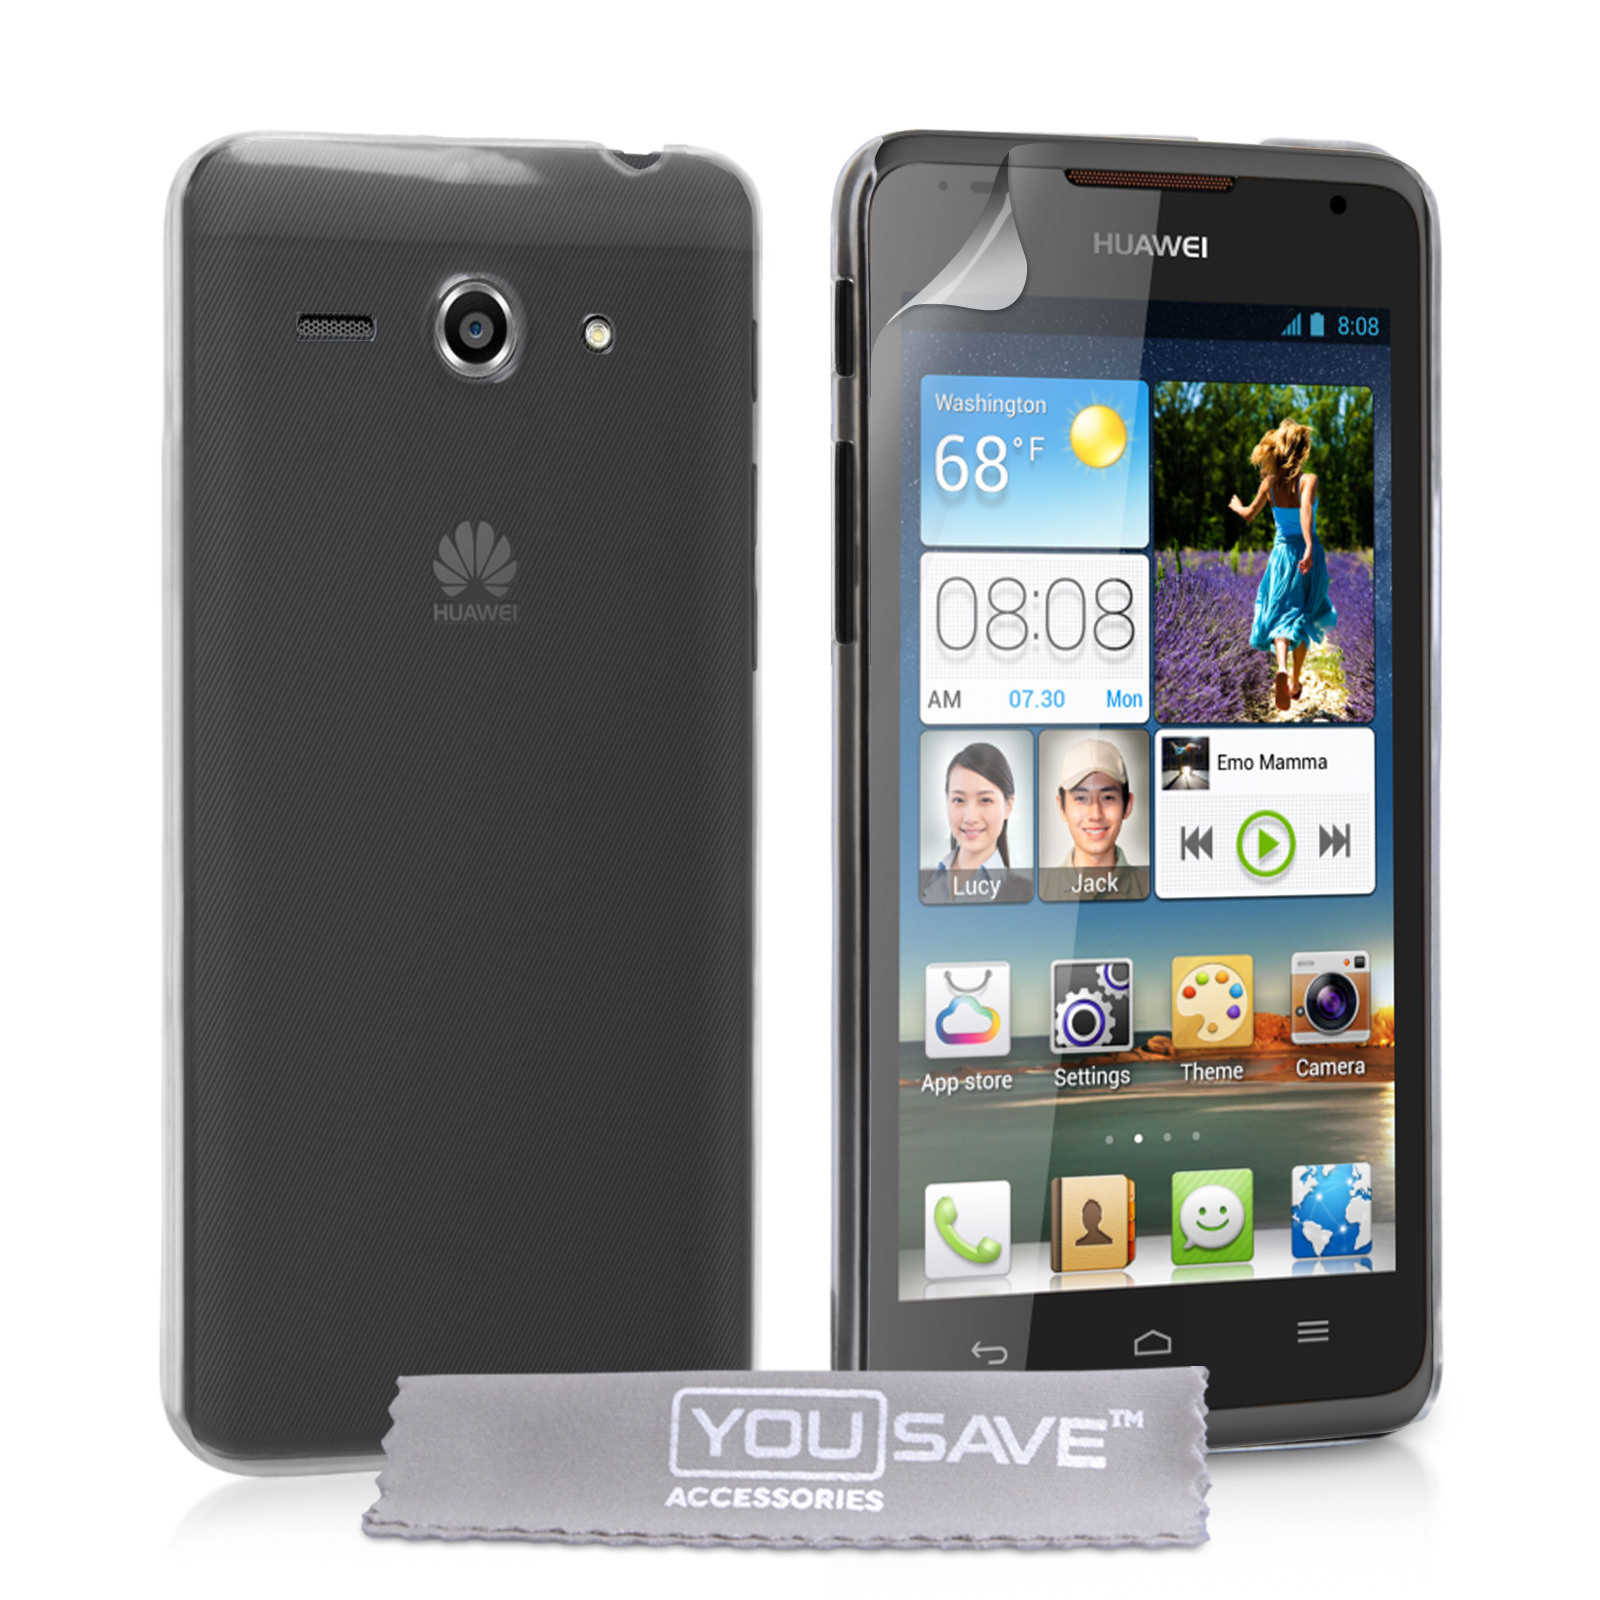 YouSave Accessories Huawei Ascend Y530 Hard Case - Crystal Clear